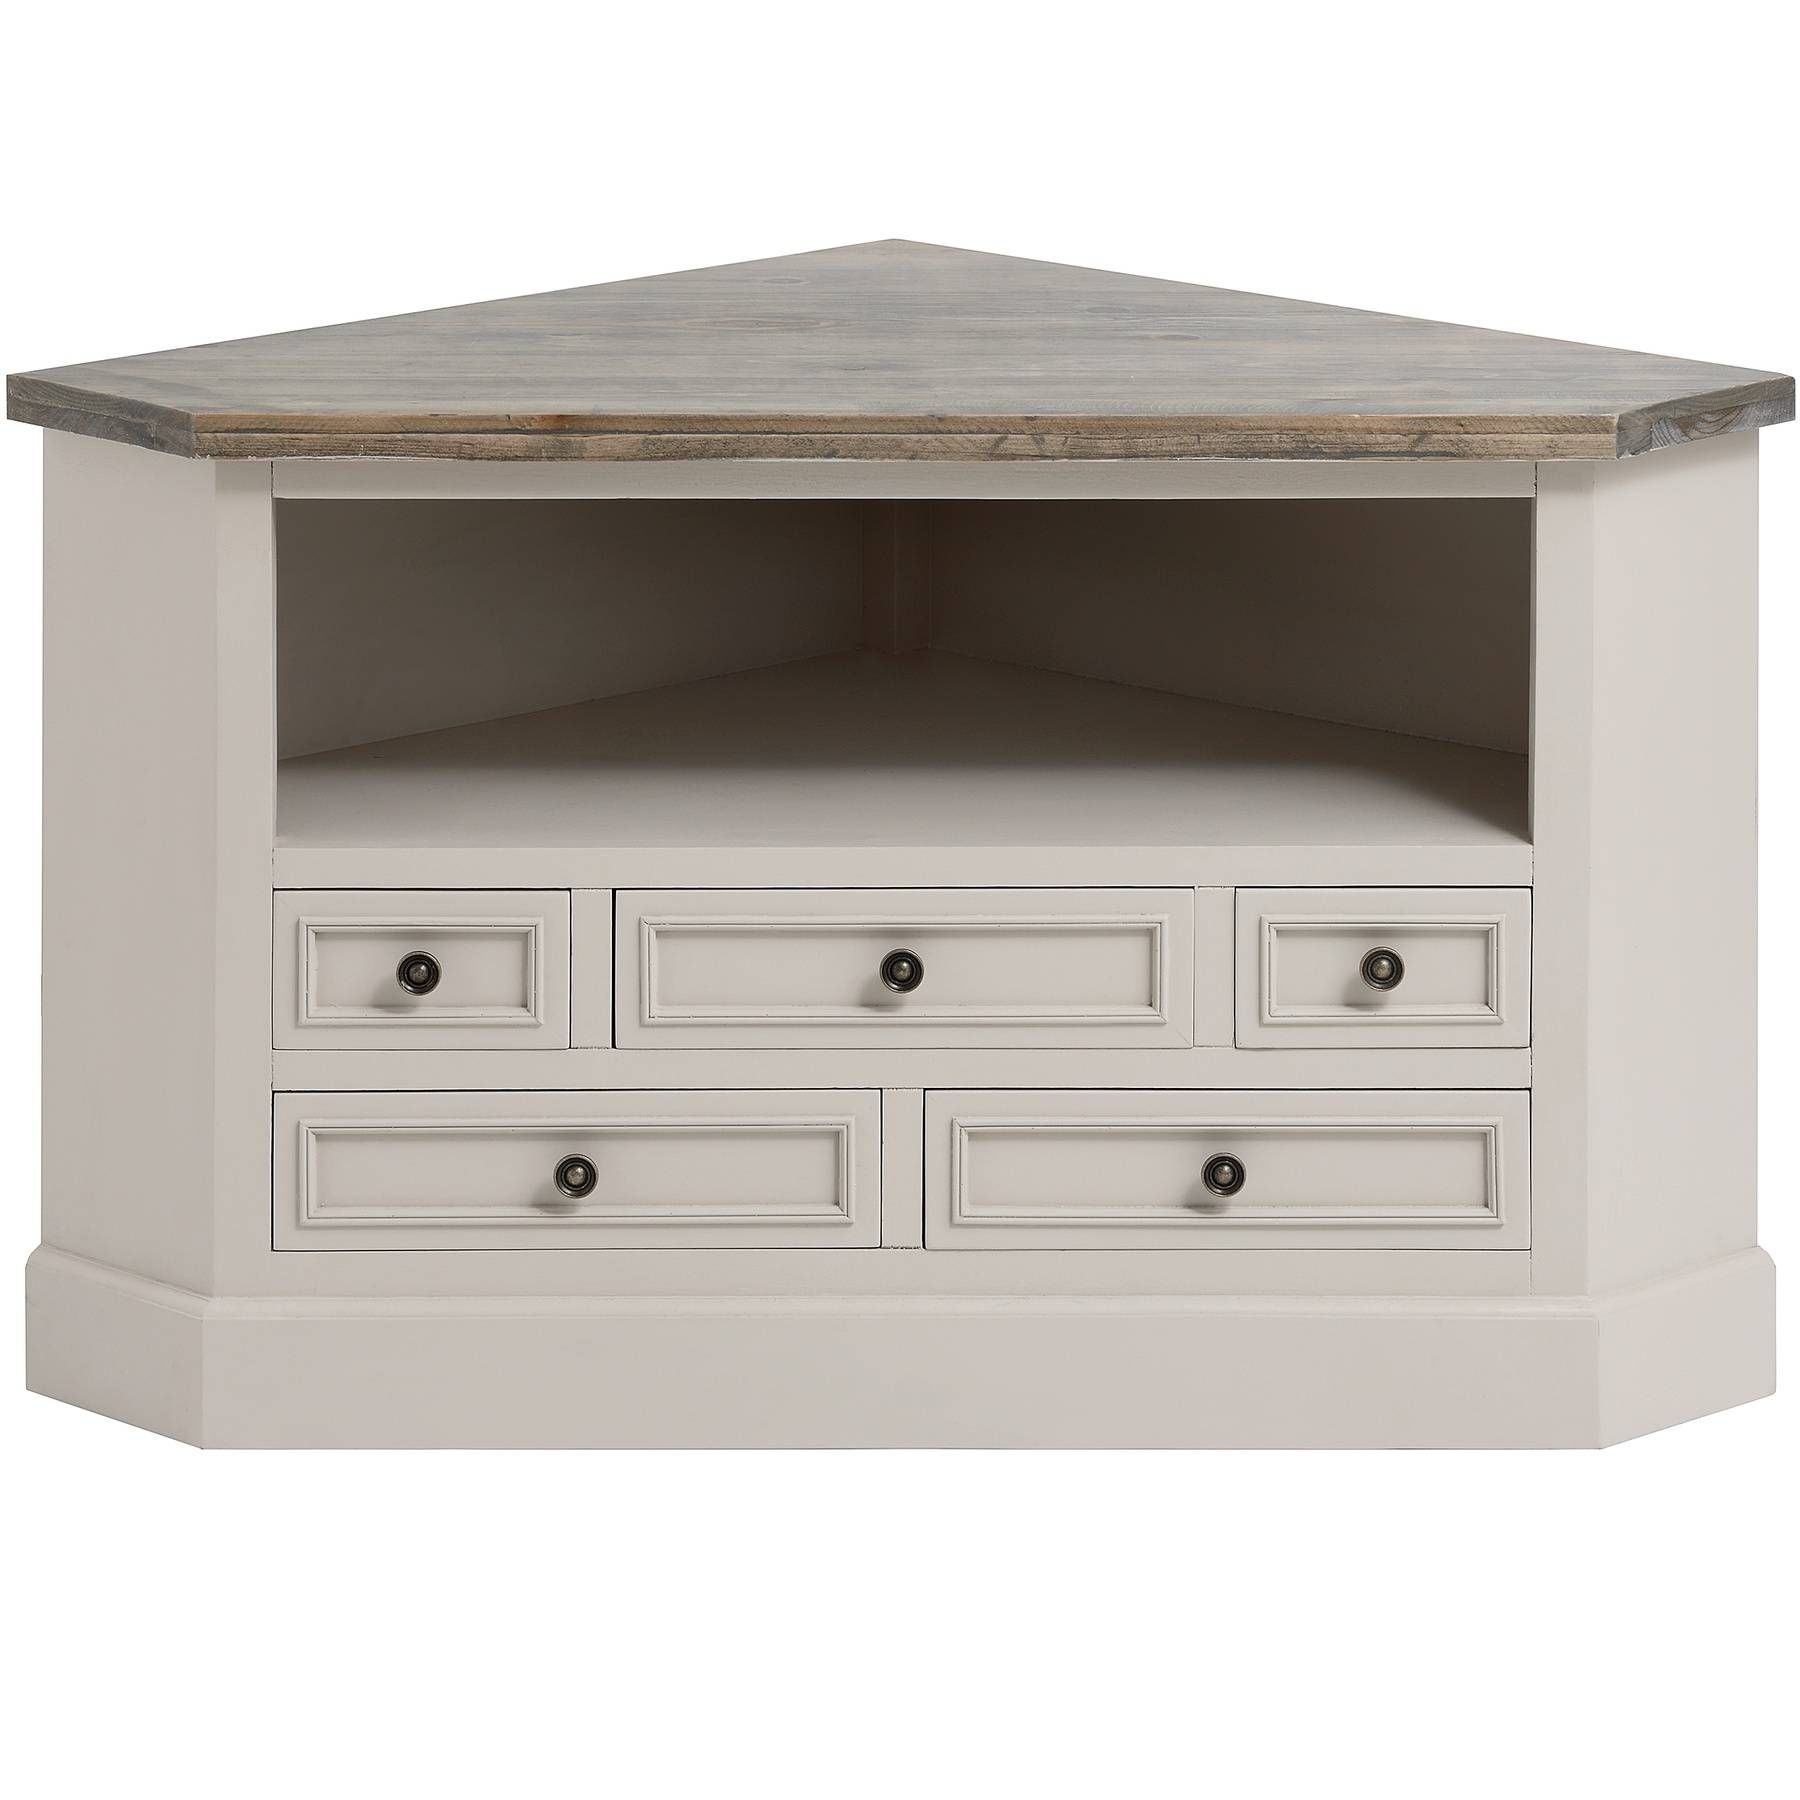 Rustic White Painted Walnut Wood Corner Tv Stand With Drawers Of Intended For White Corner Tv Cabinets (View 15 of 15)